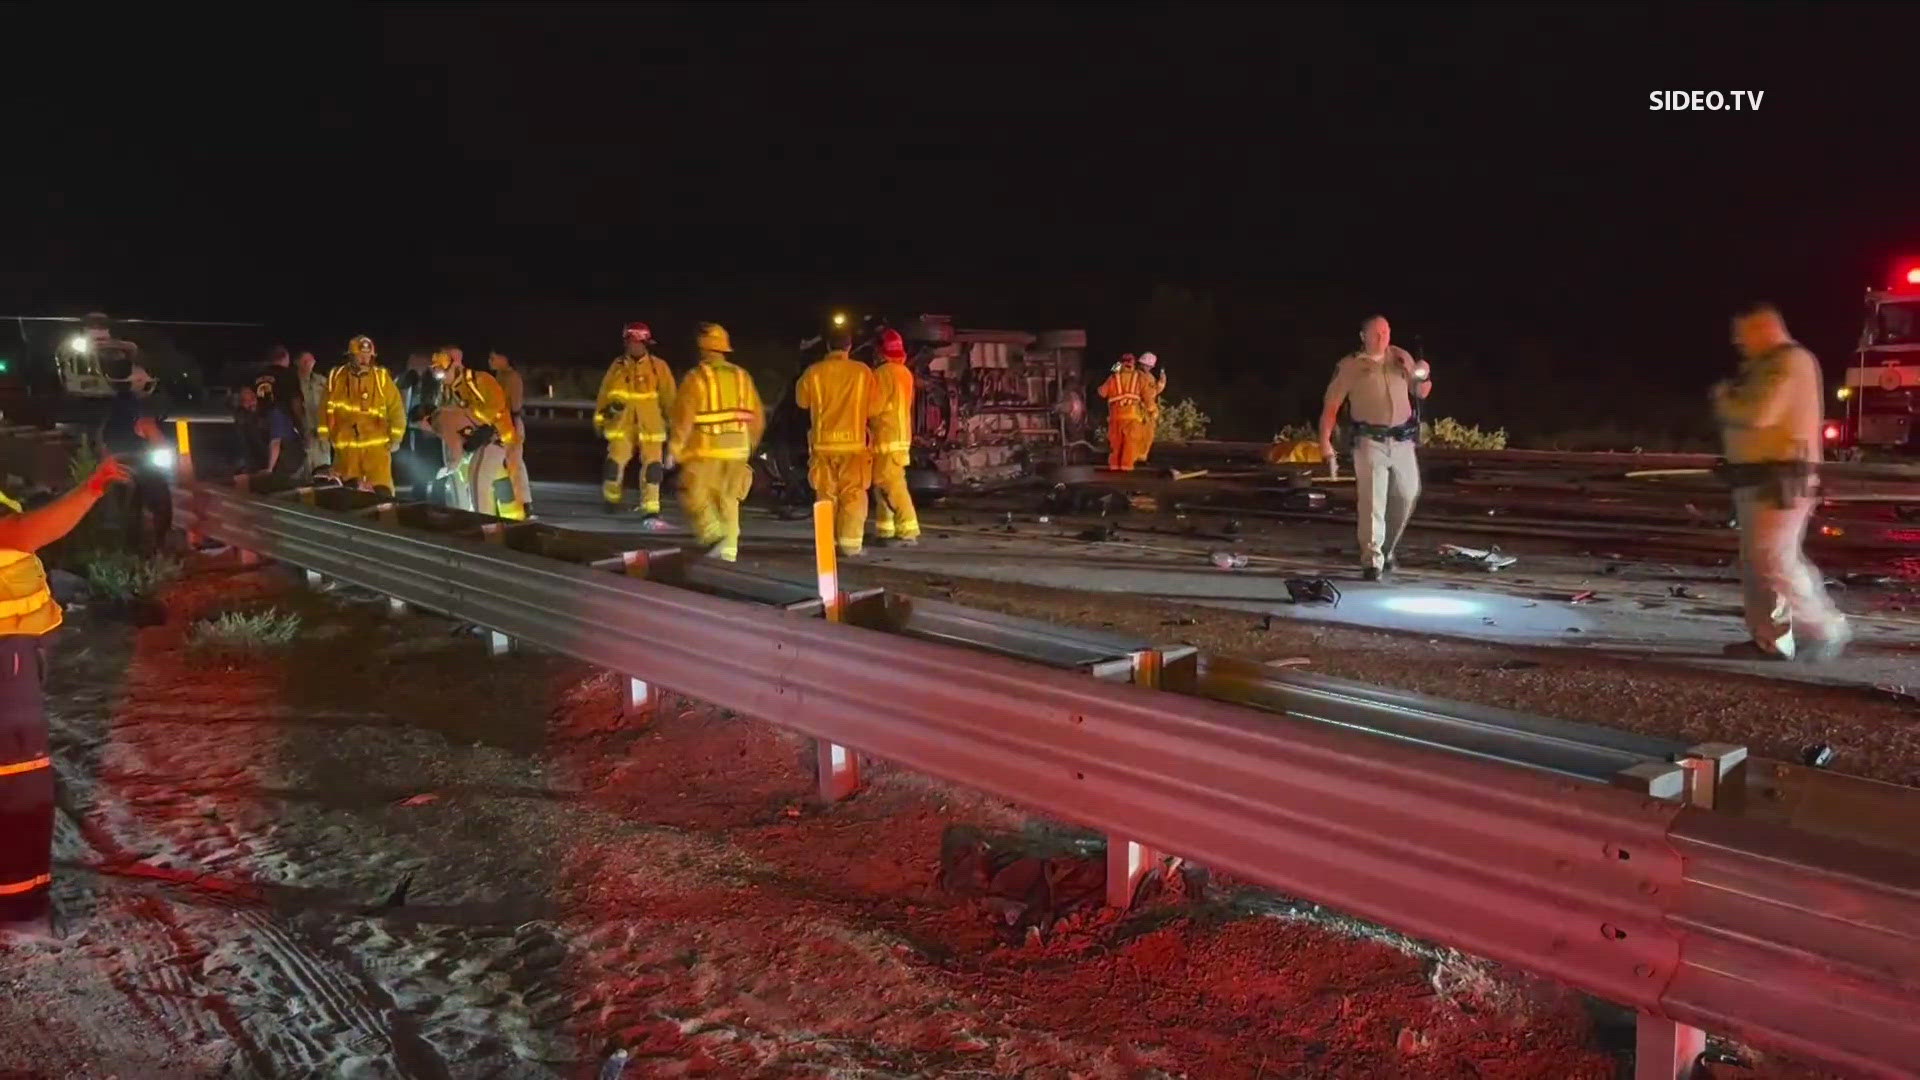 The fatal crash north of Oceanside near Camp Pendleton happened around 3 a.m. Thursday.